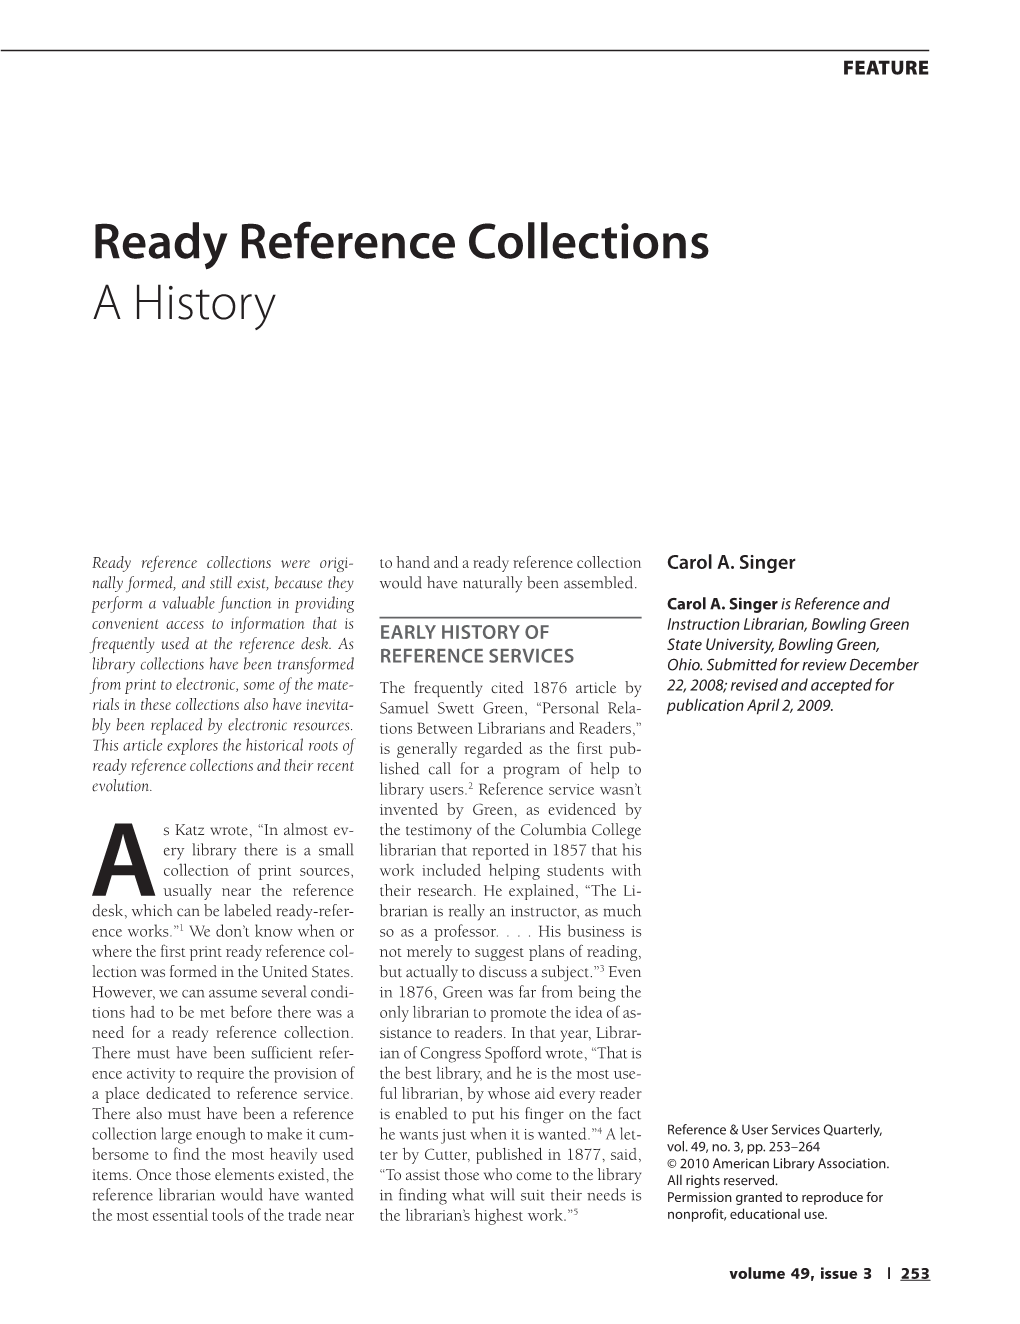 Ready Reference Collections a History